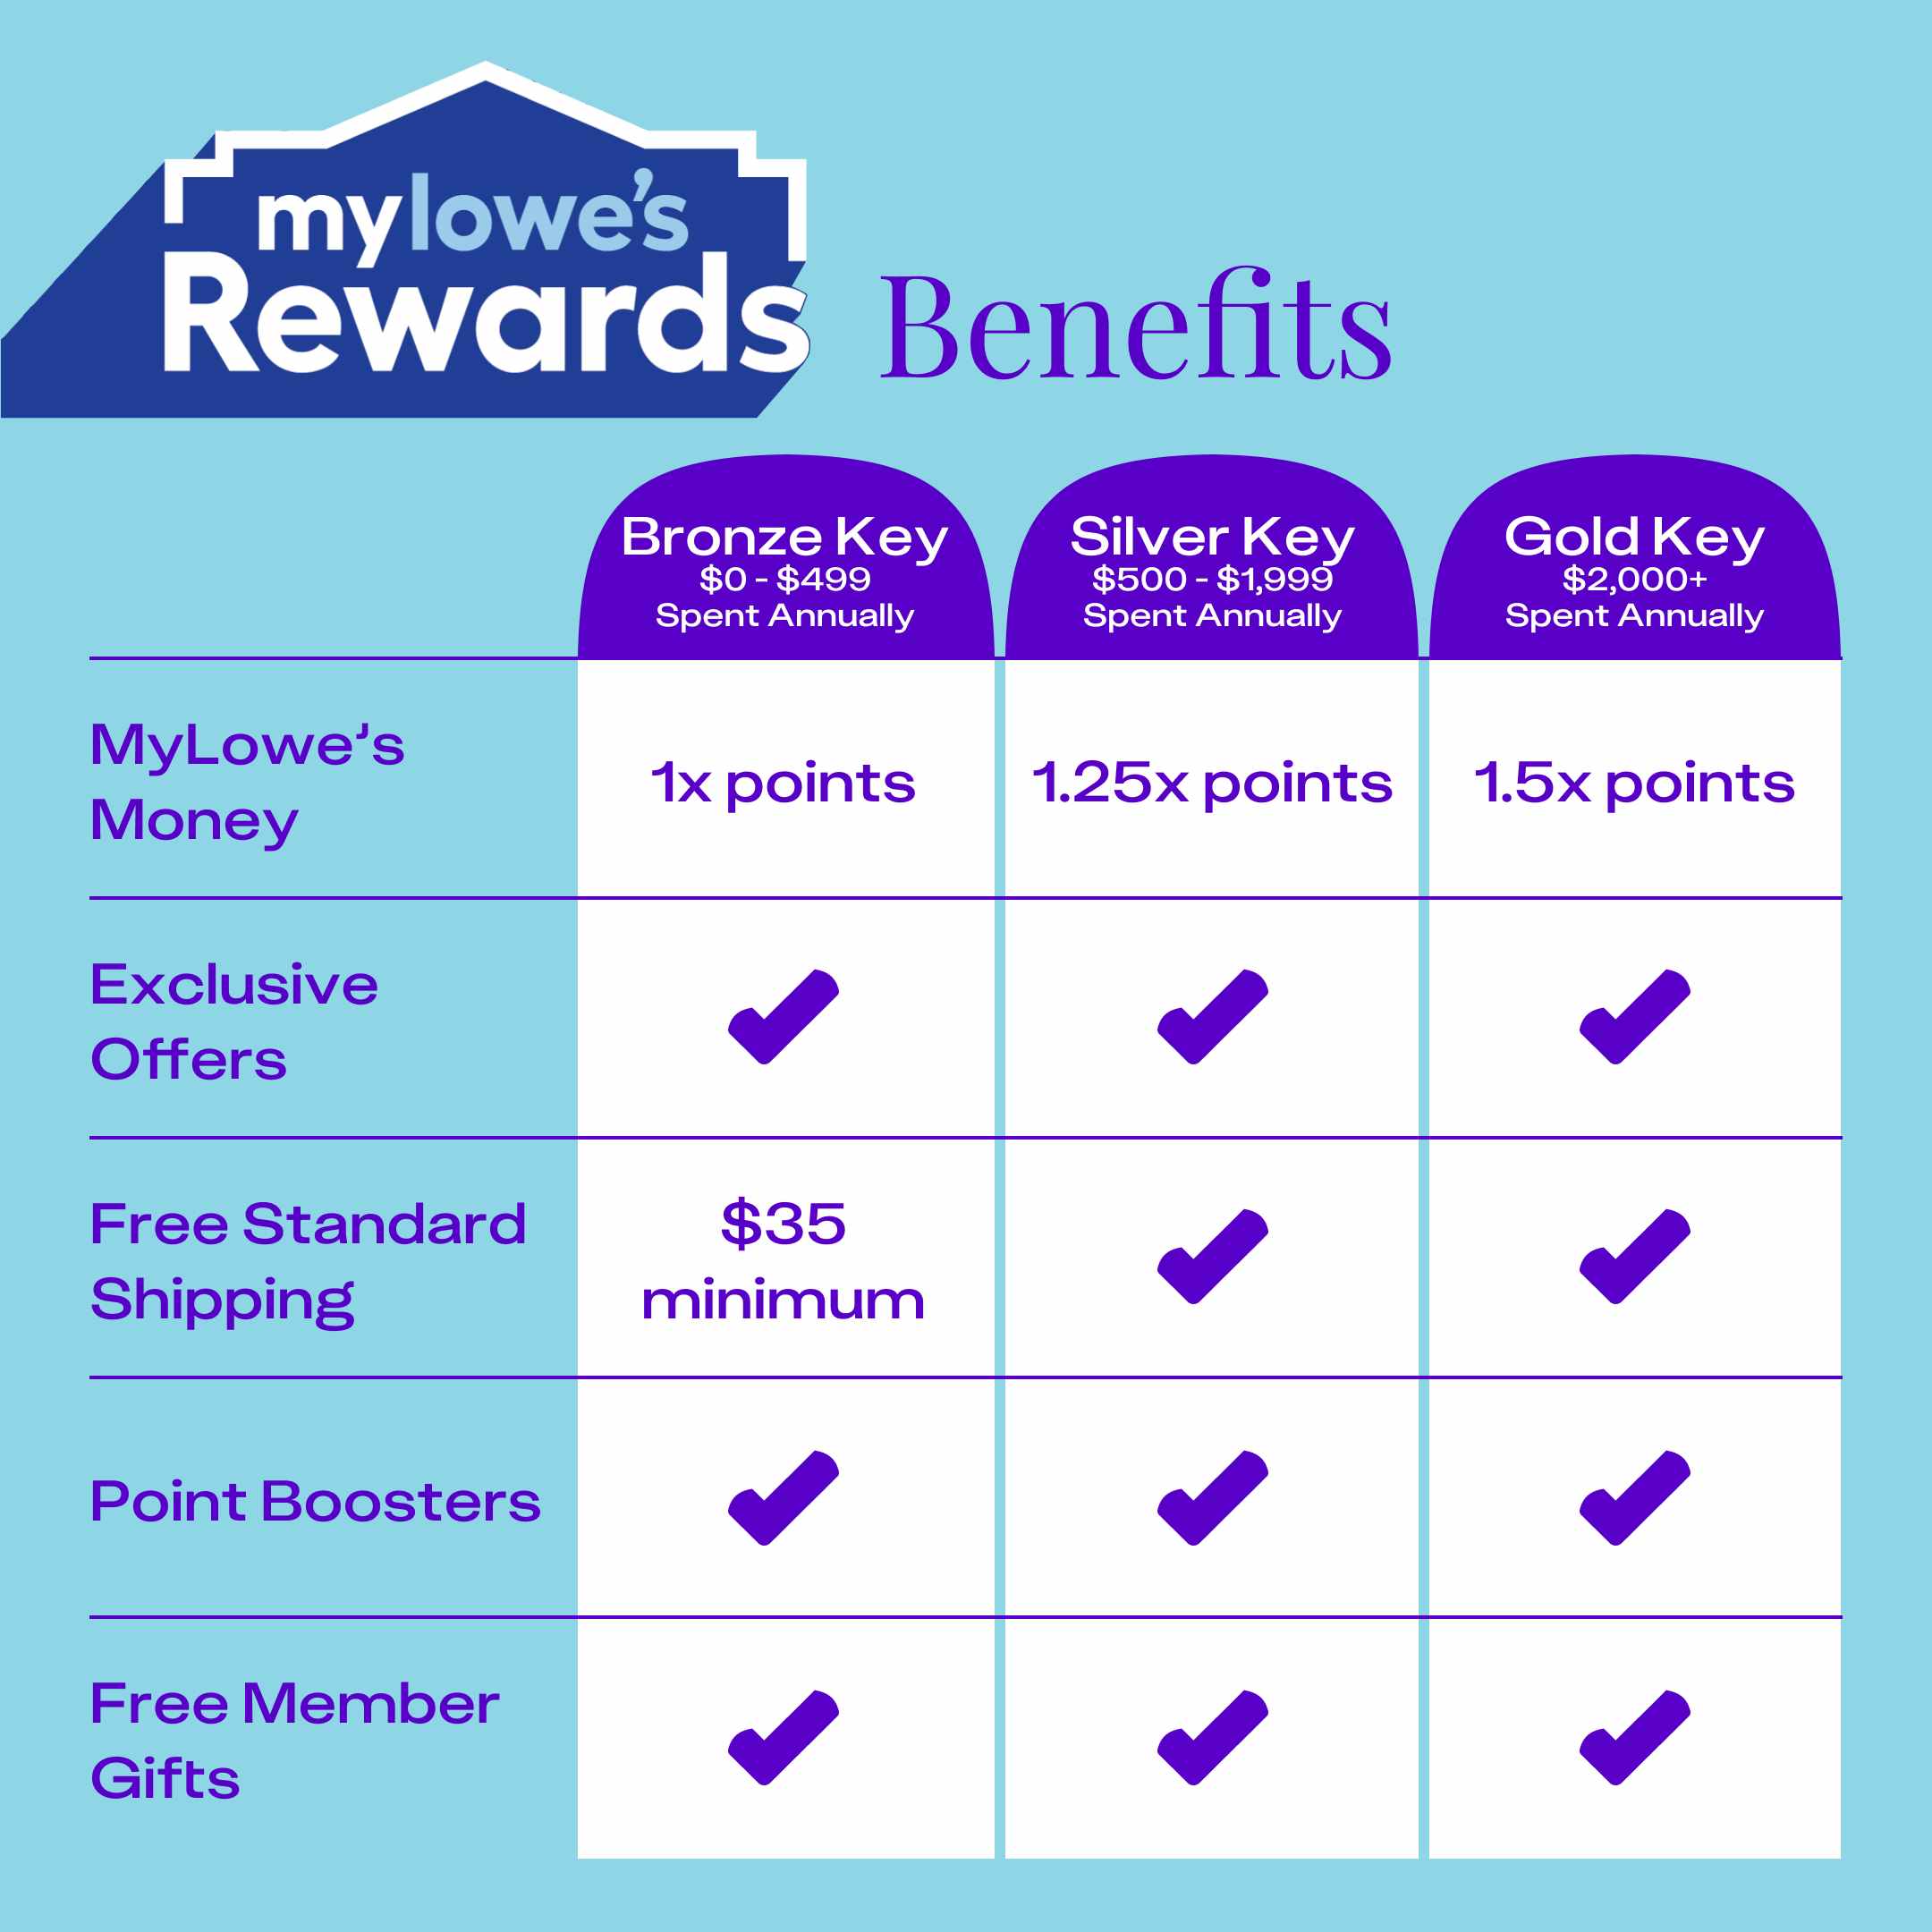 Chart summarizing the benefits of the Lowe's rewards program at the Bronze Key, Silver Key, and Gold Key spend levels.